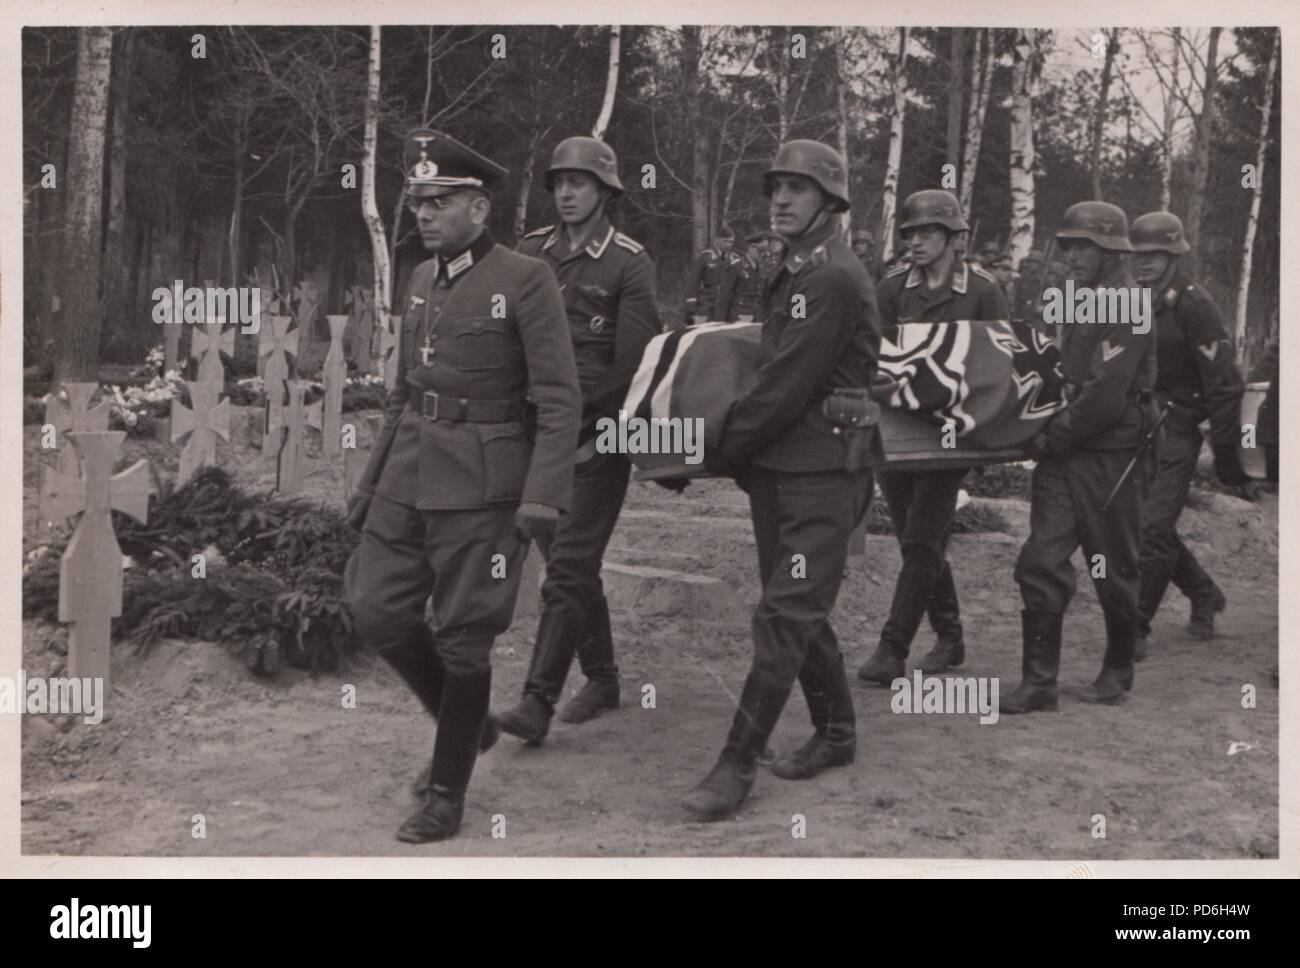 Image from the photo album of Oberleutnant Oscar Müller of  Kampfgeschwader 1: Captioned 'I had a comrade….', this photo shows the Chaplain of II./KG 1 leading the funeral cortege for a fallen comrade, Russia 1941. Stock Photo